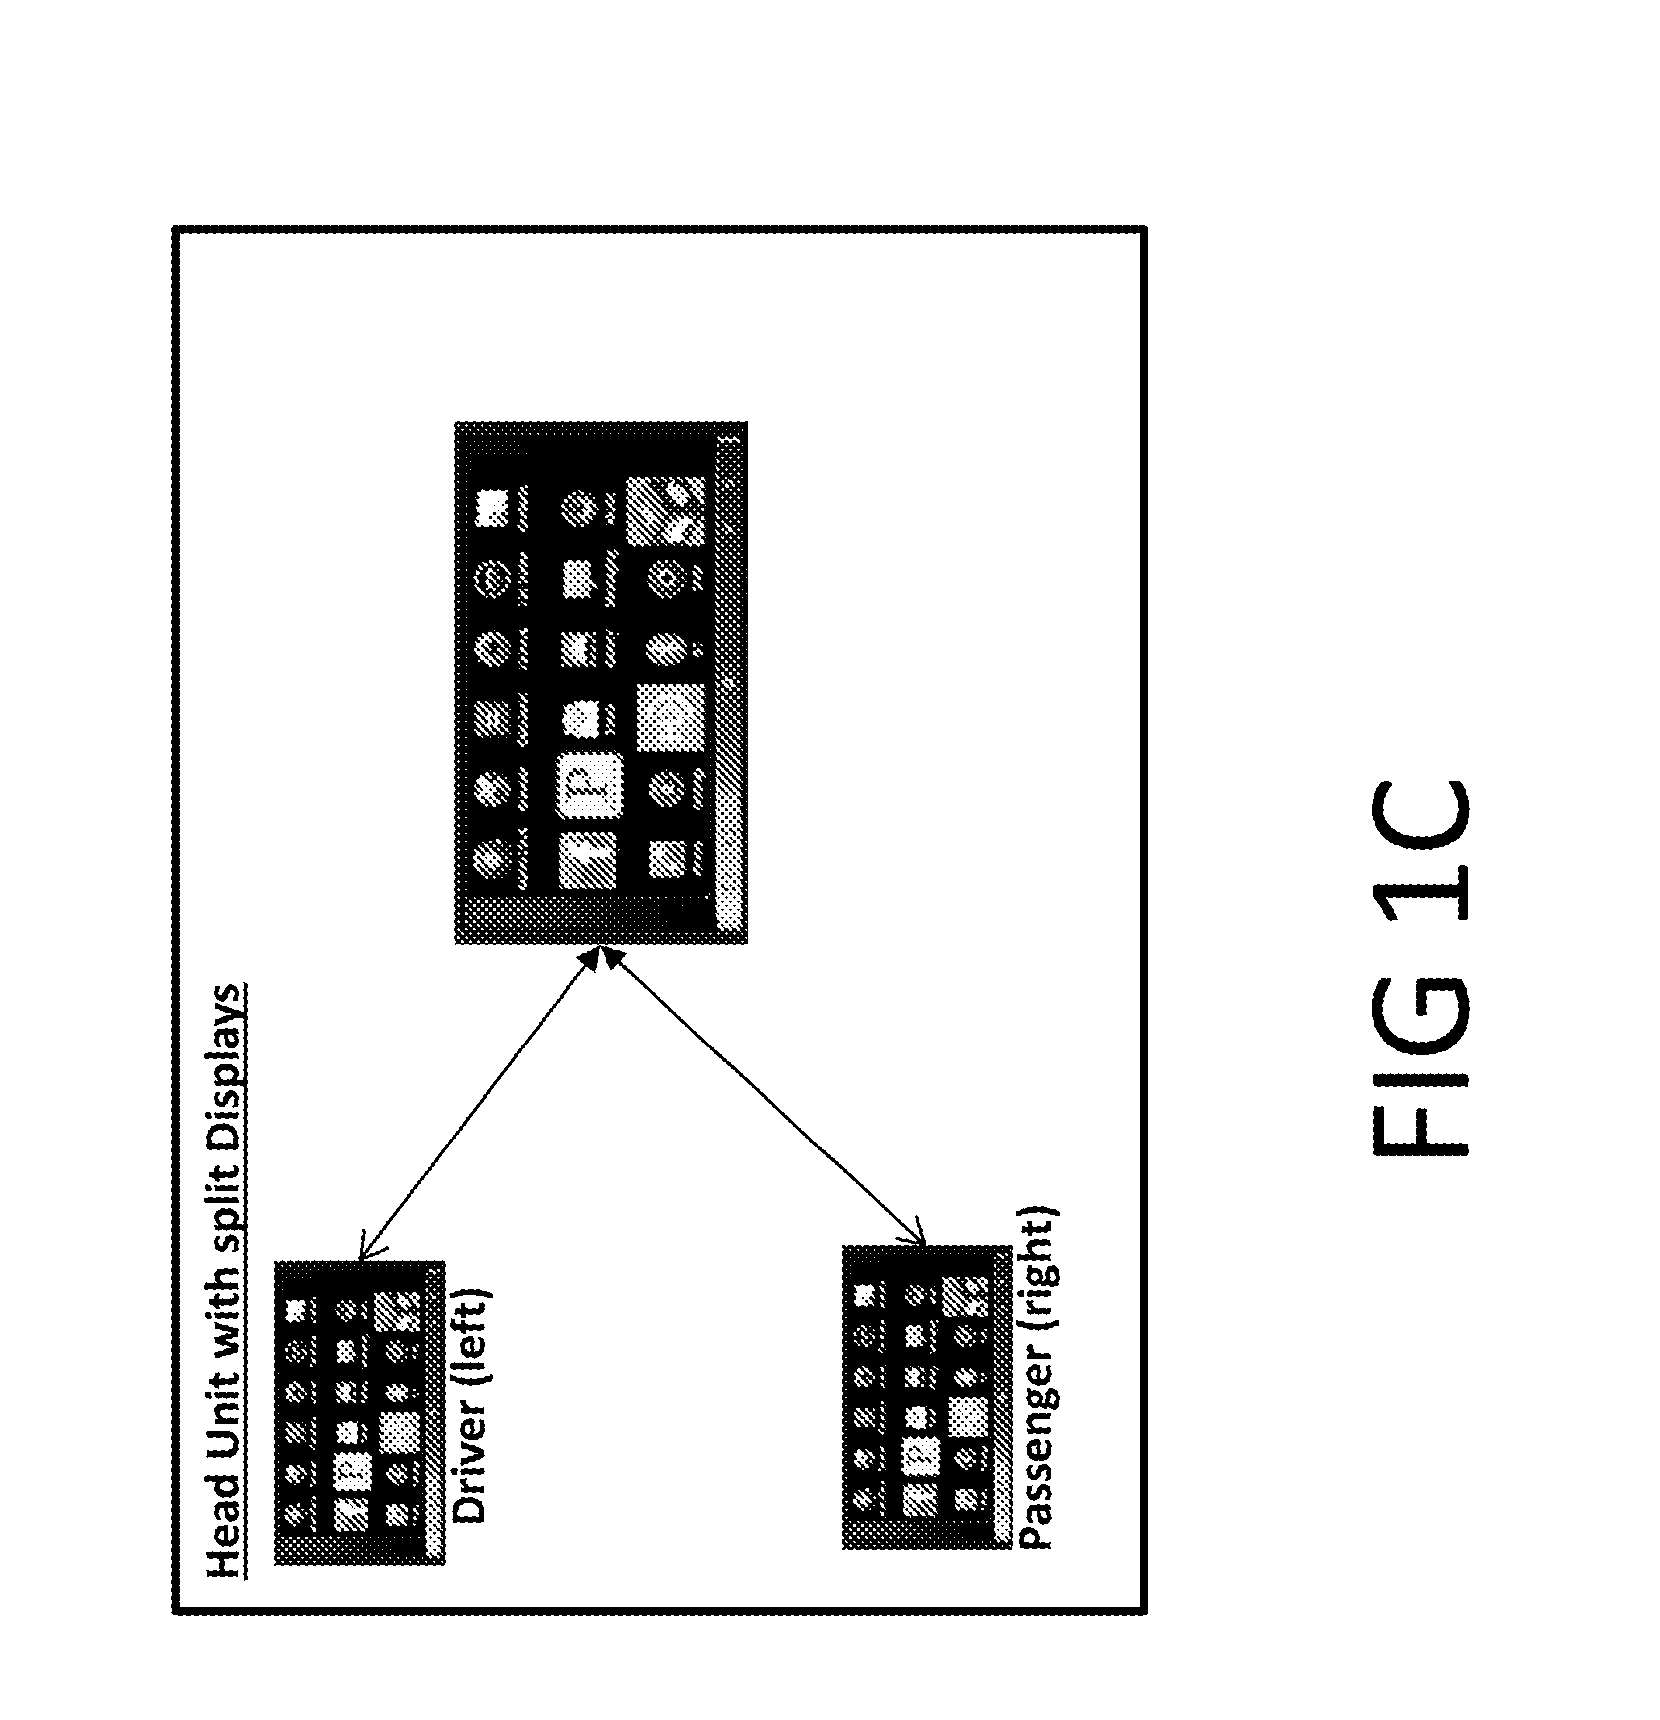 System and Method for Monitoring Apps in a Vehicle to Reduce Driver Distraction